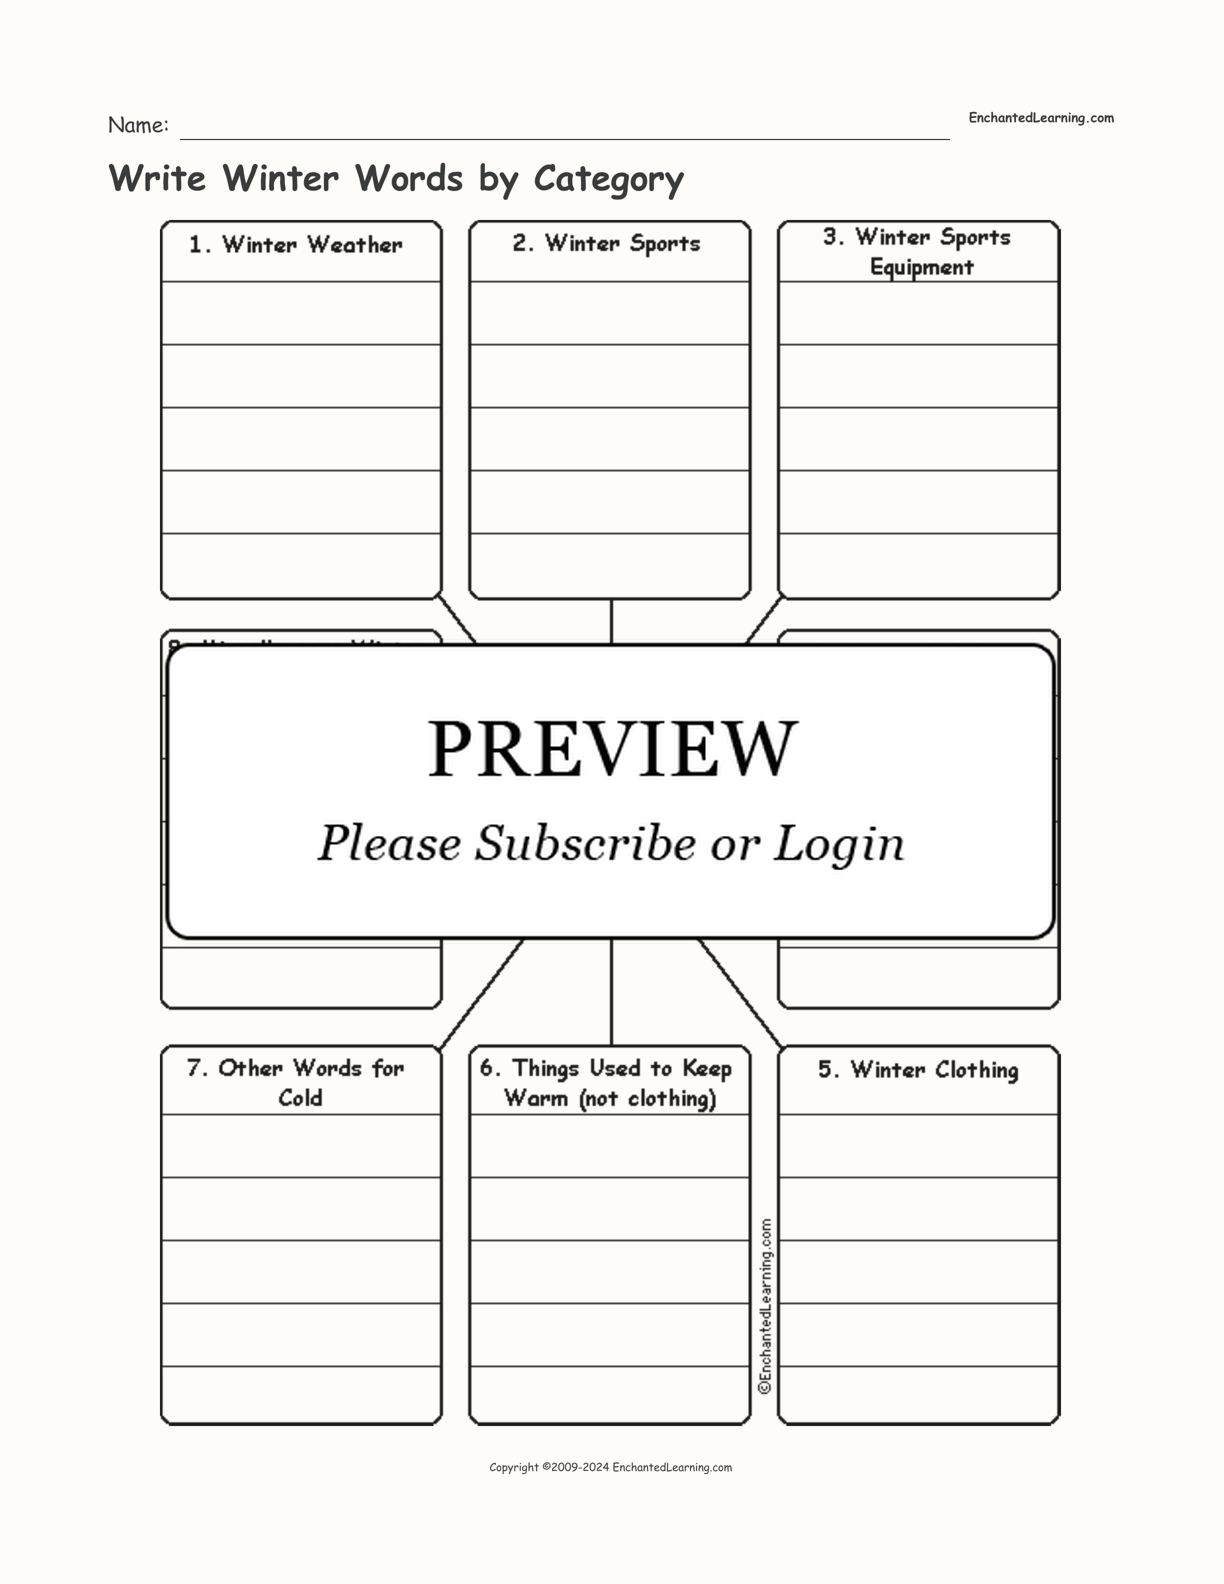 Write Winter Words by Category interactive worksheet page 1